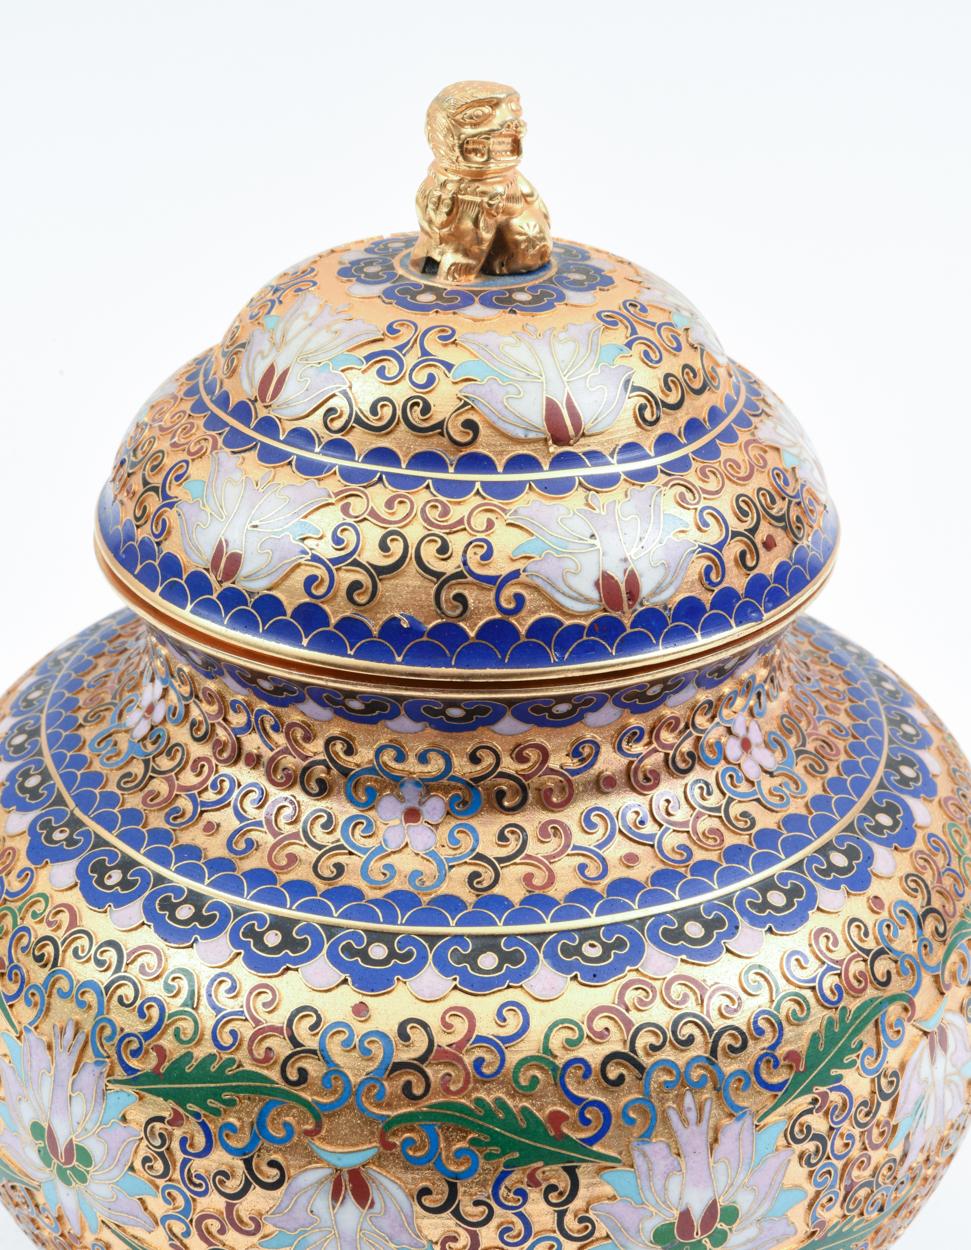 Early 20th Century Covered Decorative Cloisonne Urn / Piece